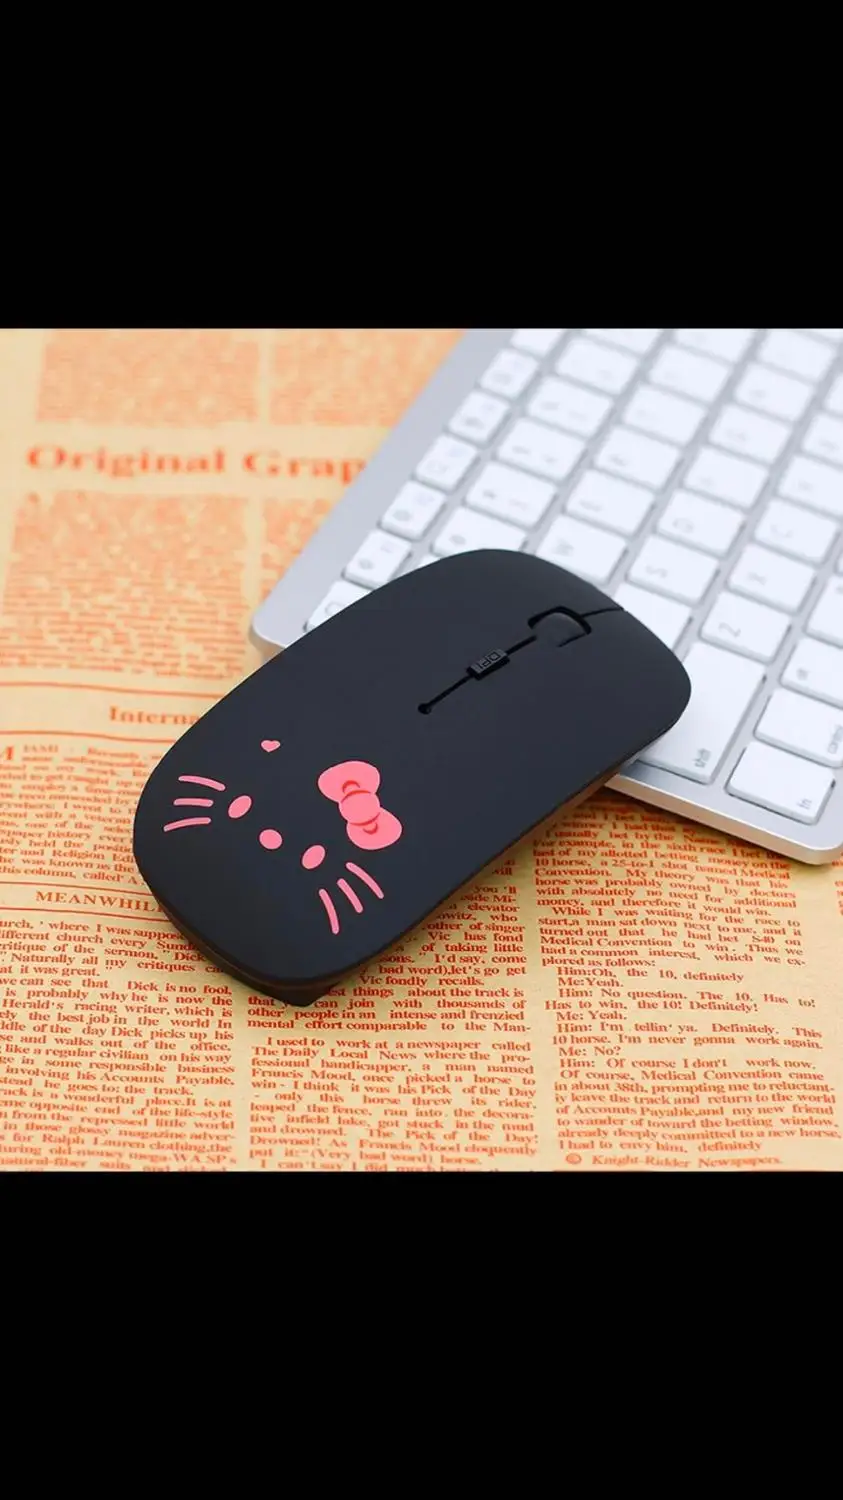 wireless cartoon mouse cute ultra thin computer mice 1600dpi usb optical gaming mause for pc laptop kids girl gift free global shipping